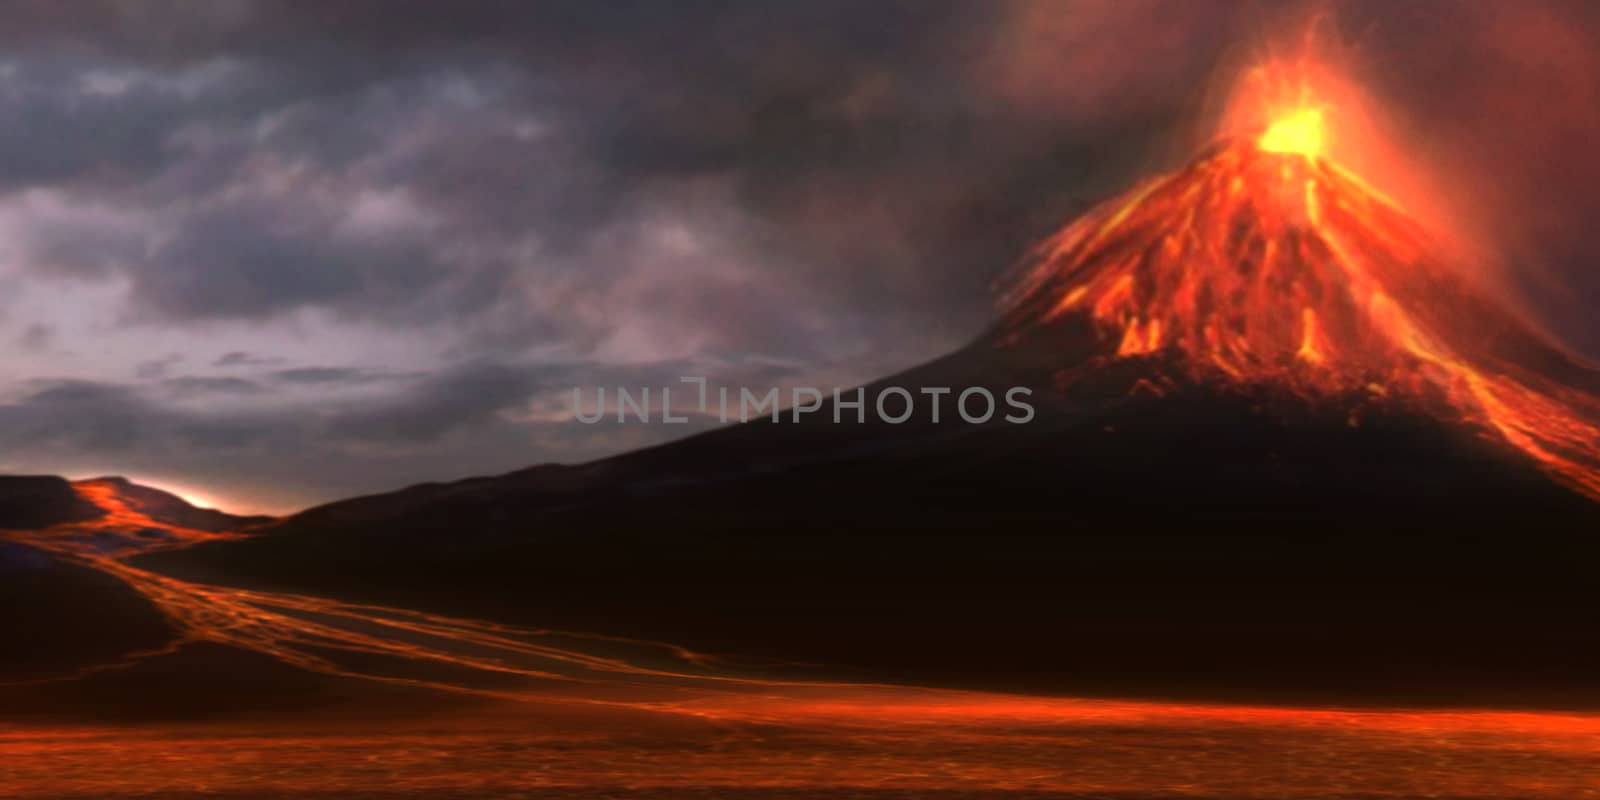 Red hot lava flows down a mountain as a volcano explodes in fire and smoke.